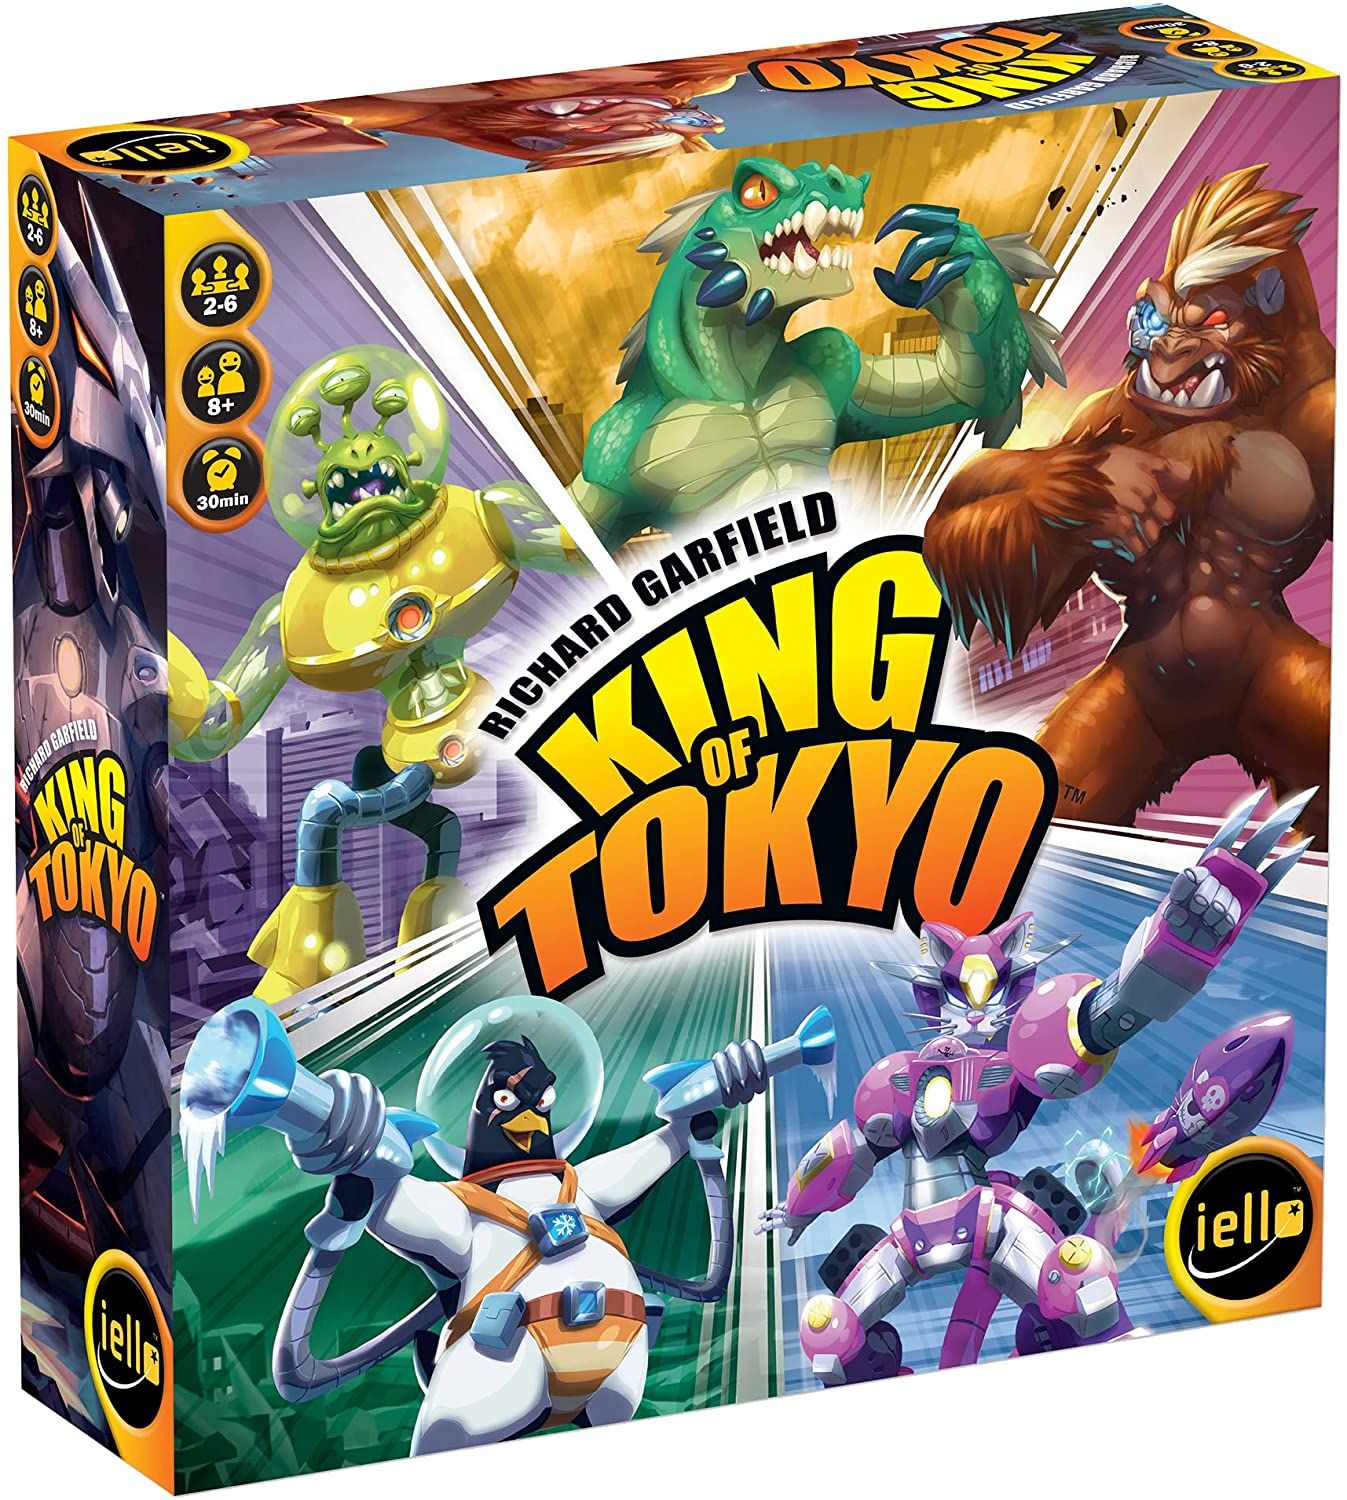 The box for the game King of Tokyo, displaying the 5 kaiju of the base game.